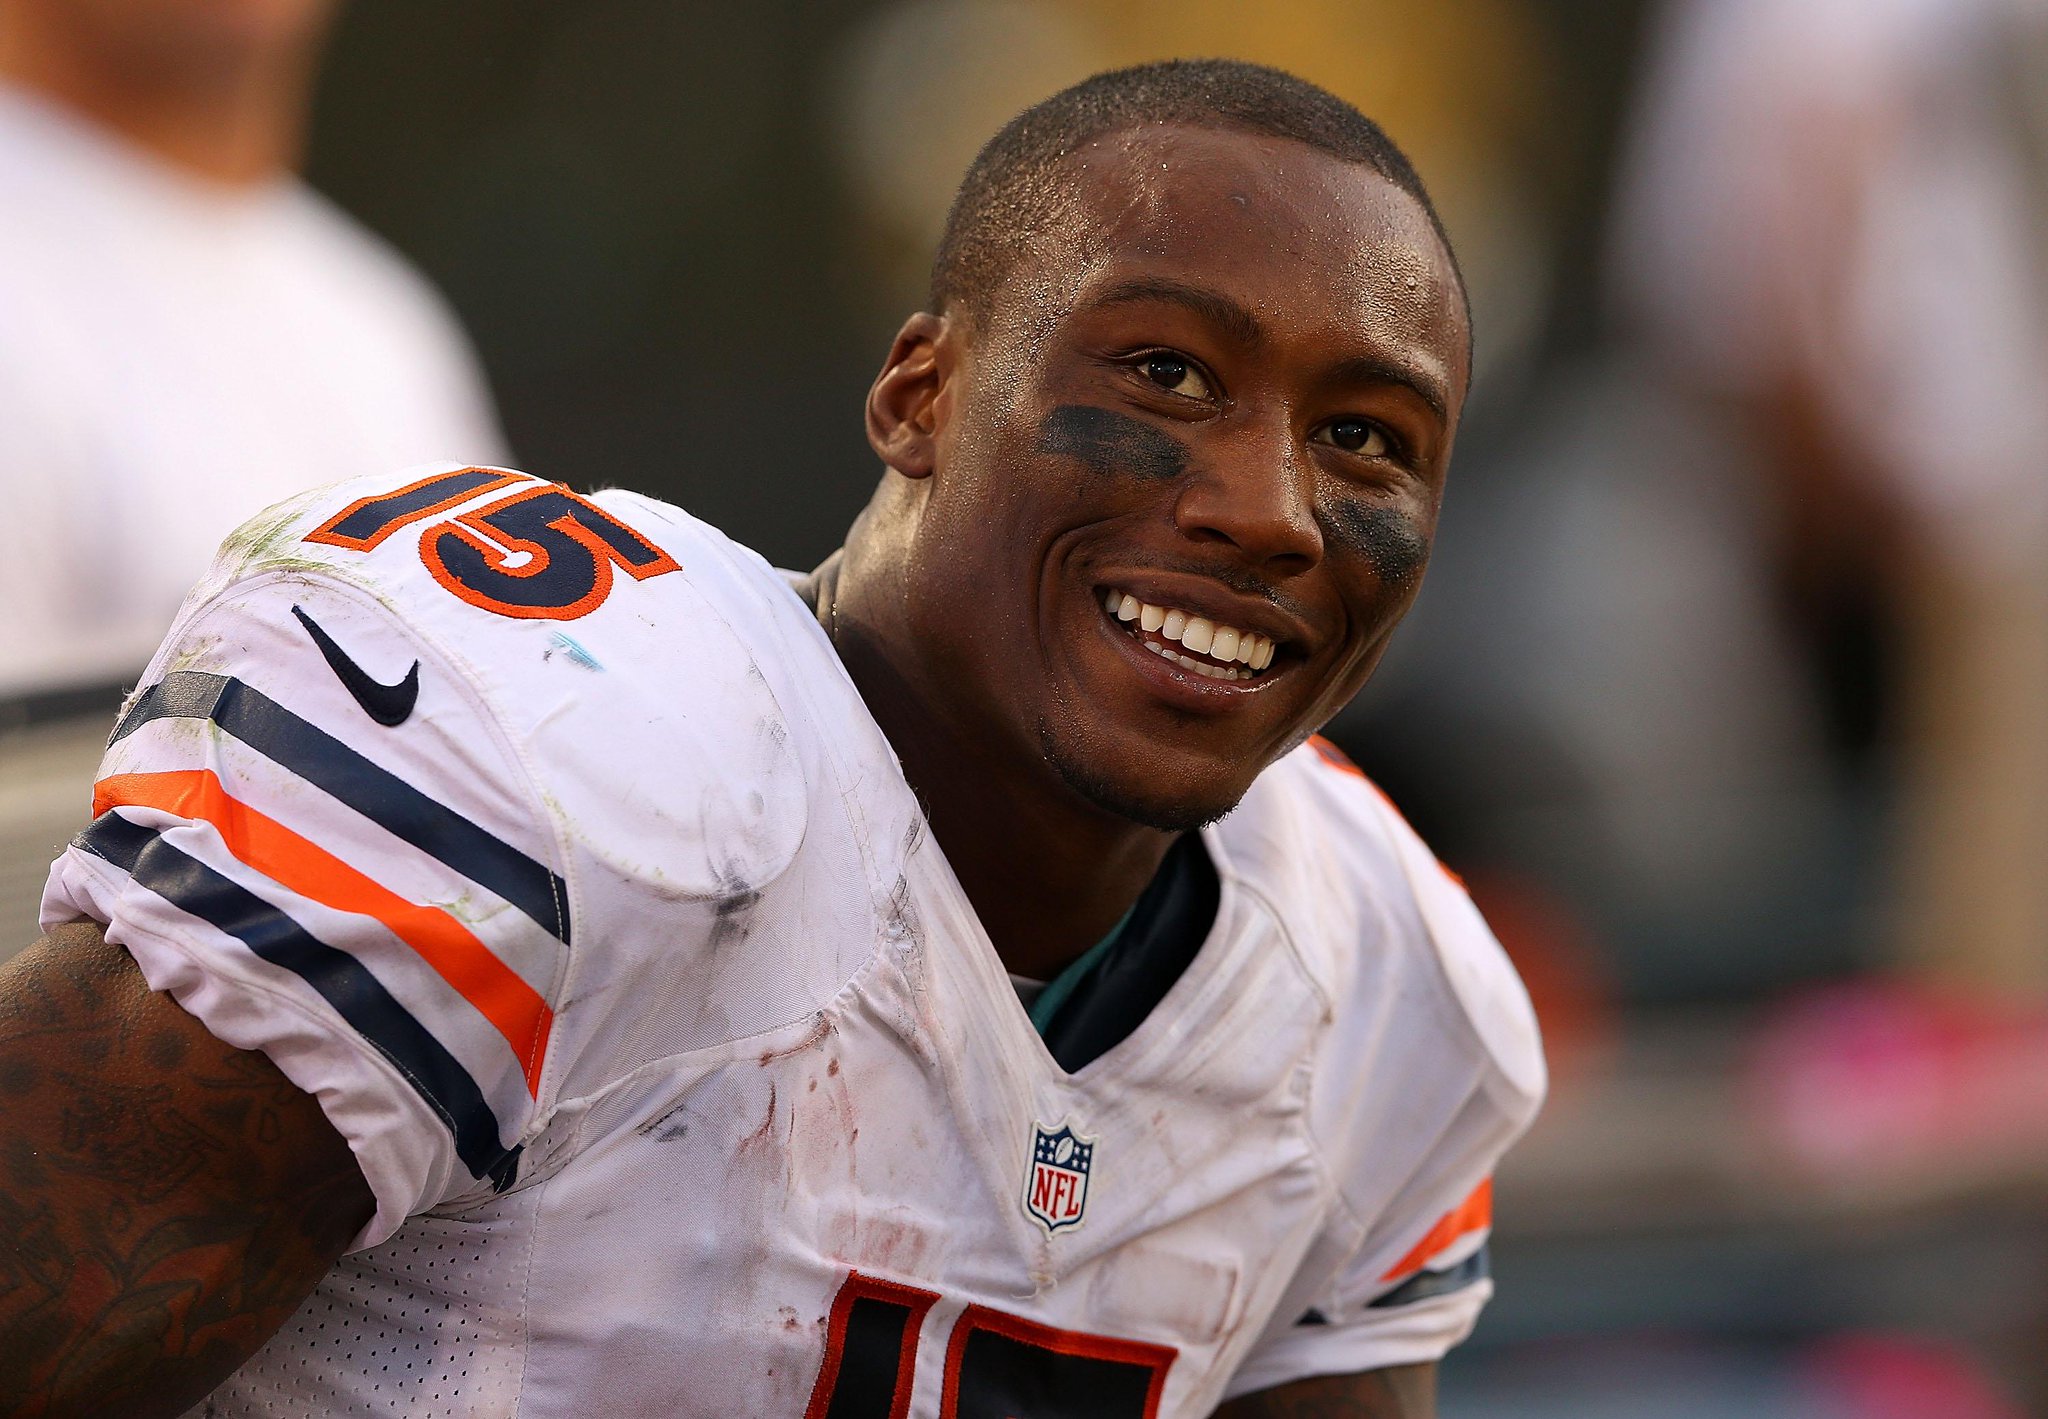 Happy 31st birthday to the one and only Brandon Marshall! Congratulations 